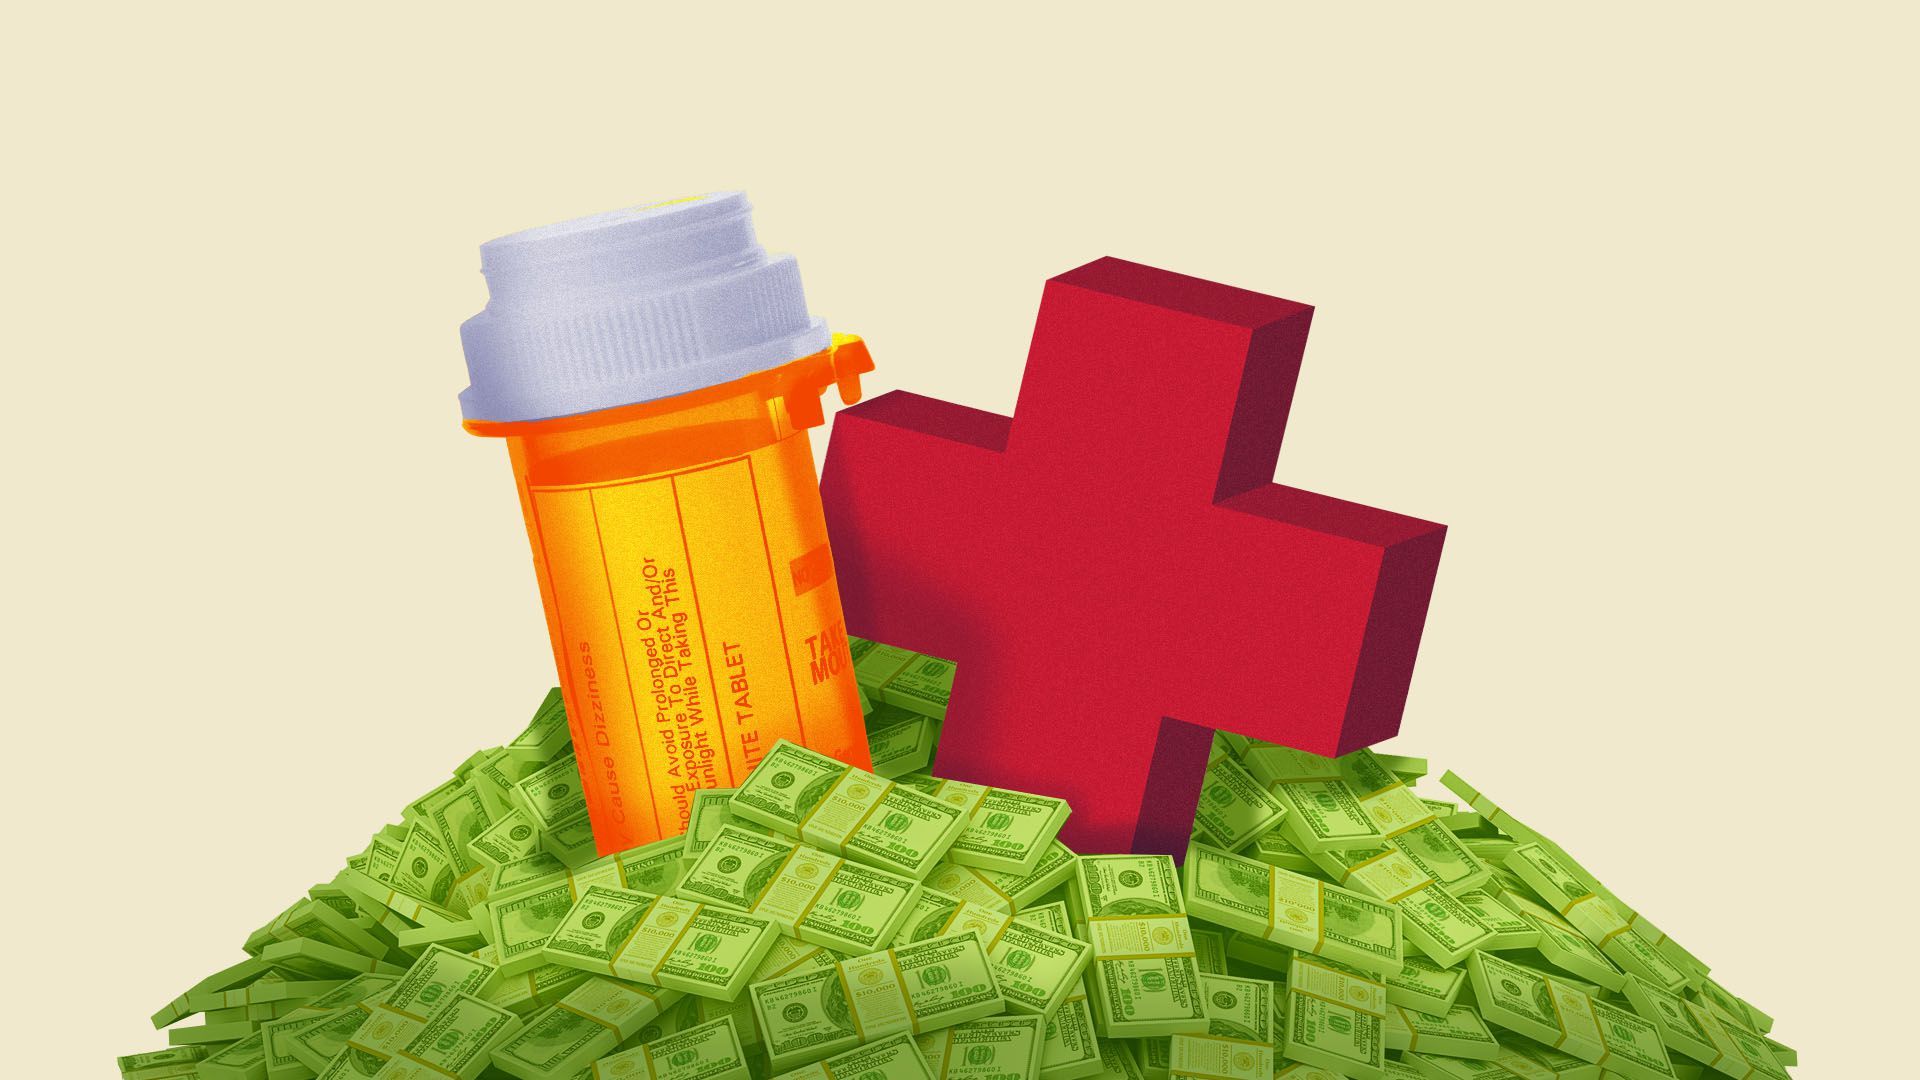 Illustration of a red cross and a pill bottle in a pile of money